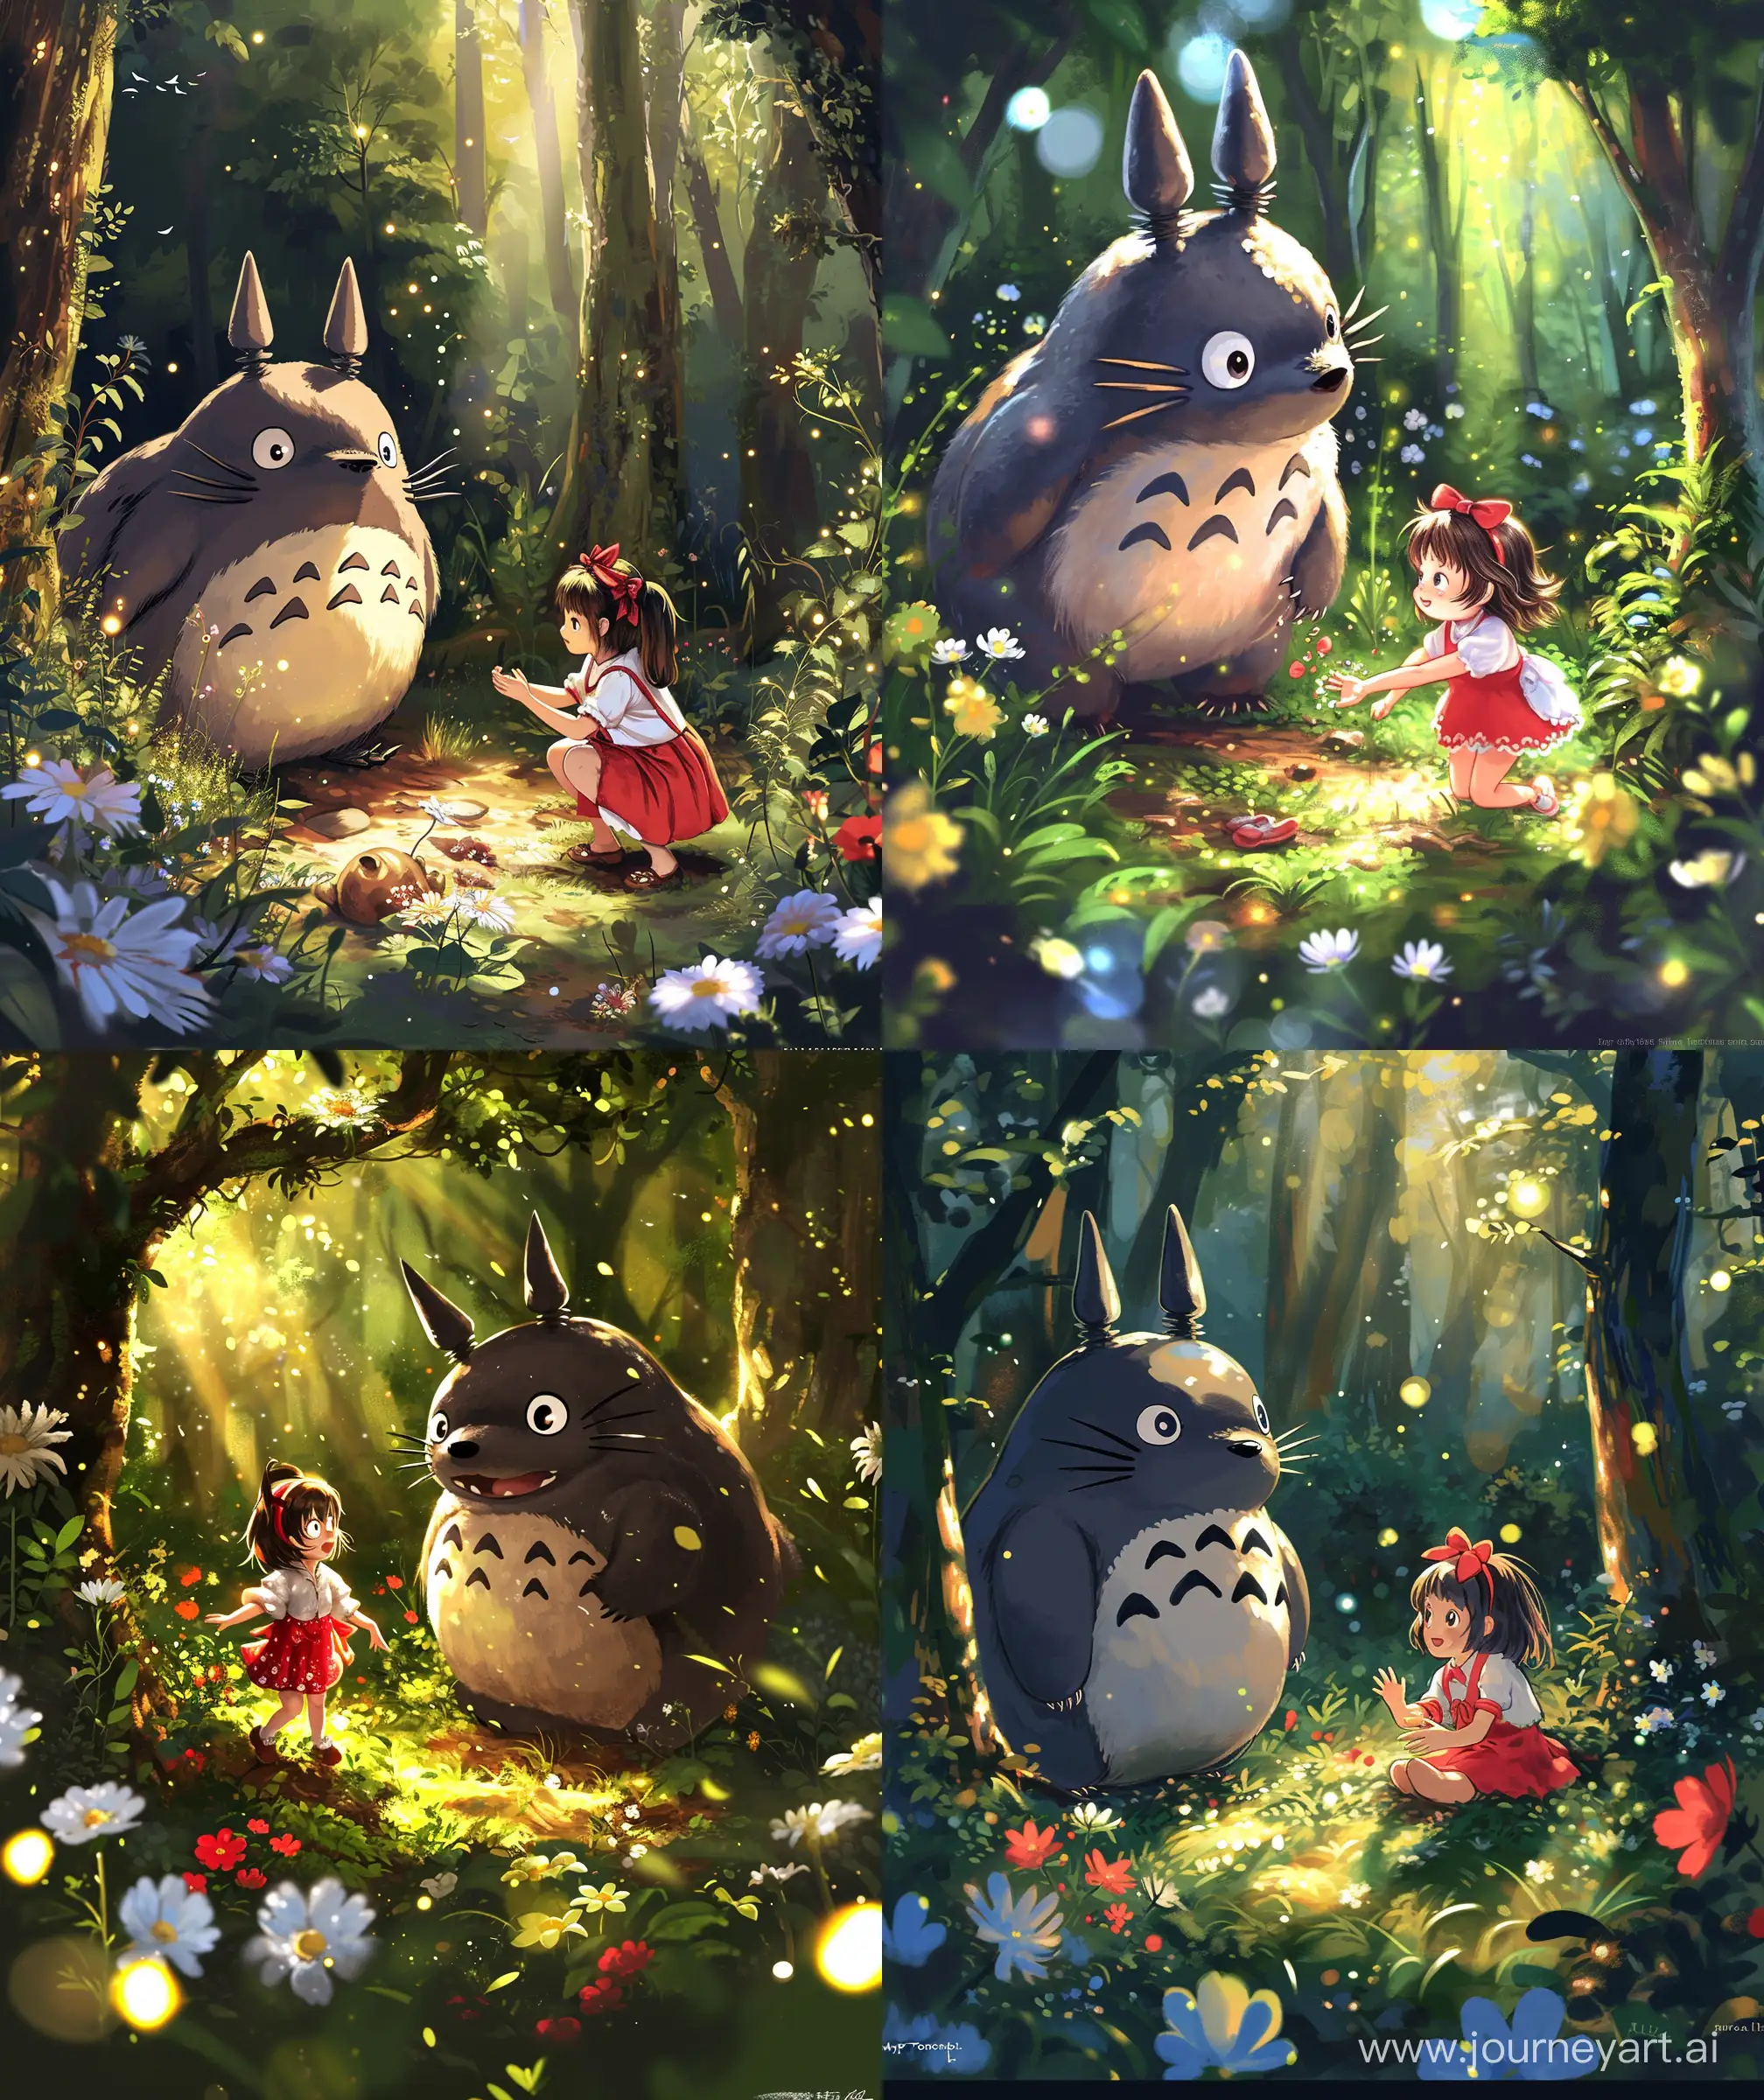 A beautiful and cute Totoro and a cute girl (( from my neighbourhood series)), forest , lumination lights, sunlight through forest, curious totoro and girl playing ,happy expression,  forest floor, girl wearing red- white frock, beautiful flowers around, ultra HD, high quality, sharp details,manga nib painting style, mokoto shinkay style, colorfull, --ar 27:32 --v 6 